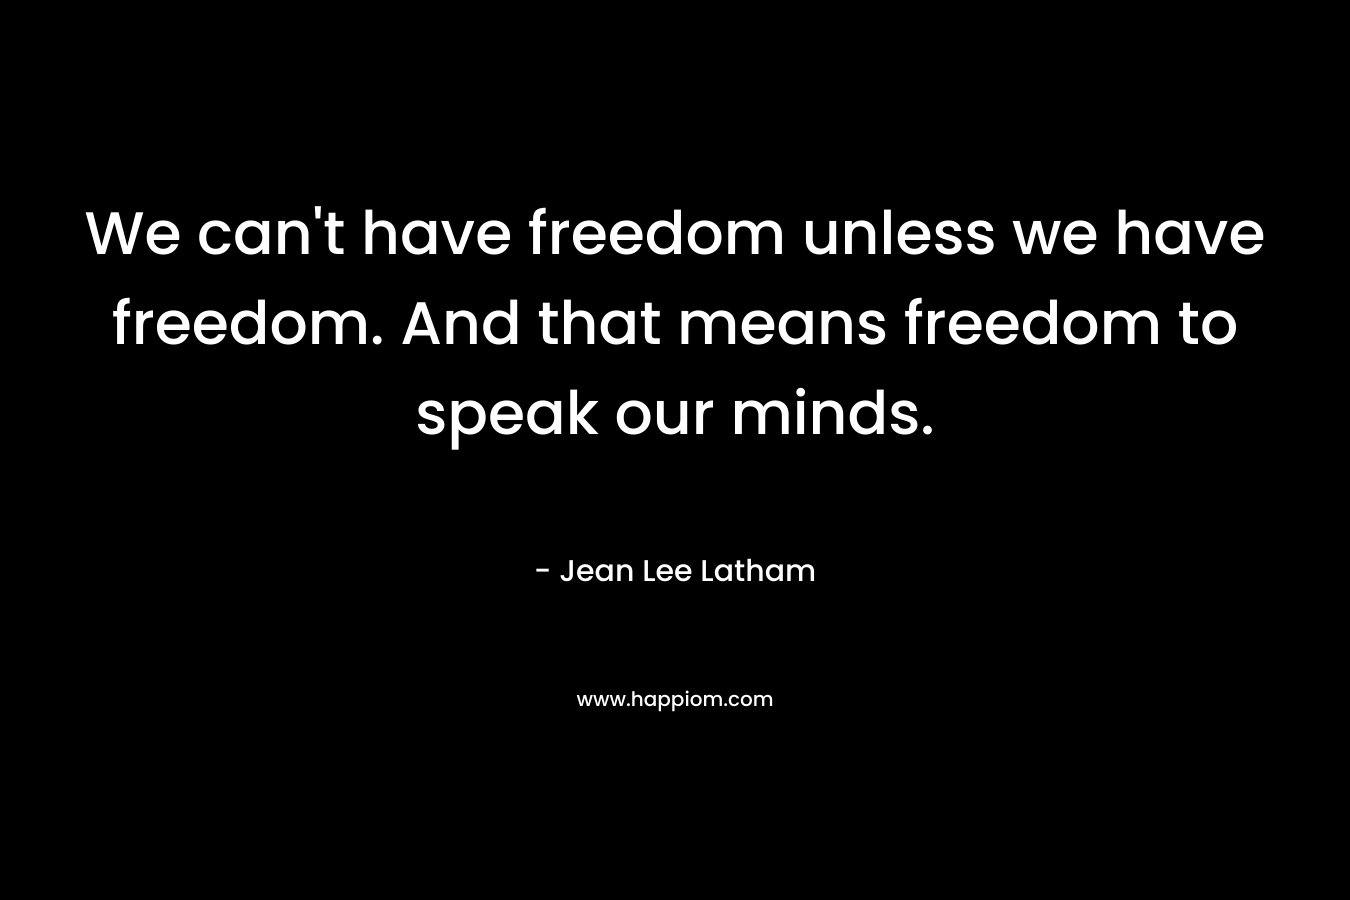 We can't have freedom unless we have freedom. And that means freedom to speak our minds.